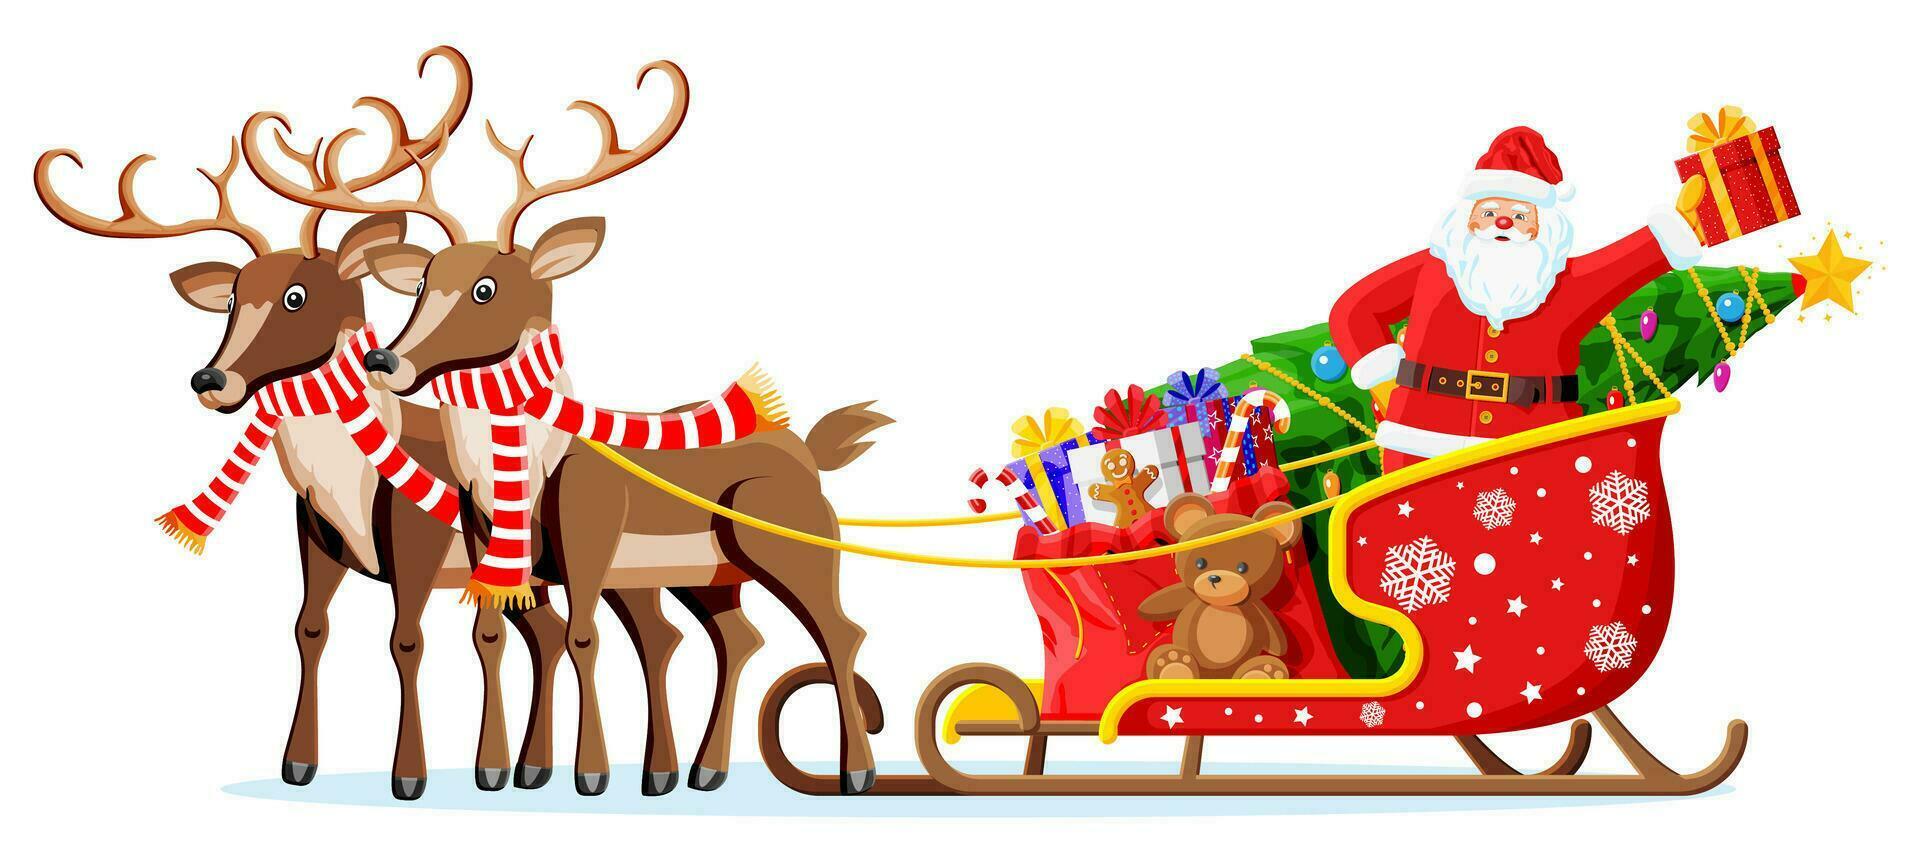 Christmas santa claus on sleigh full of gifts tree and his reindeer. Happy new year decoration. Merry christmas holiday. New year and xmas celebration. Vector illustration in flat style